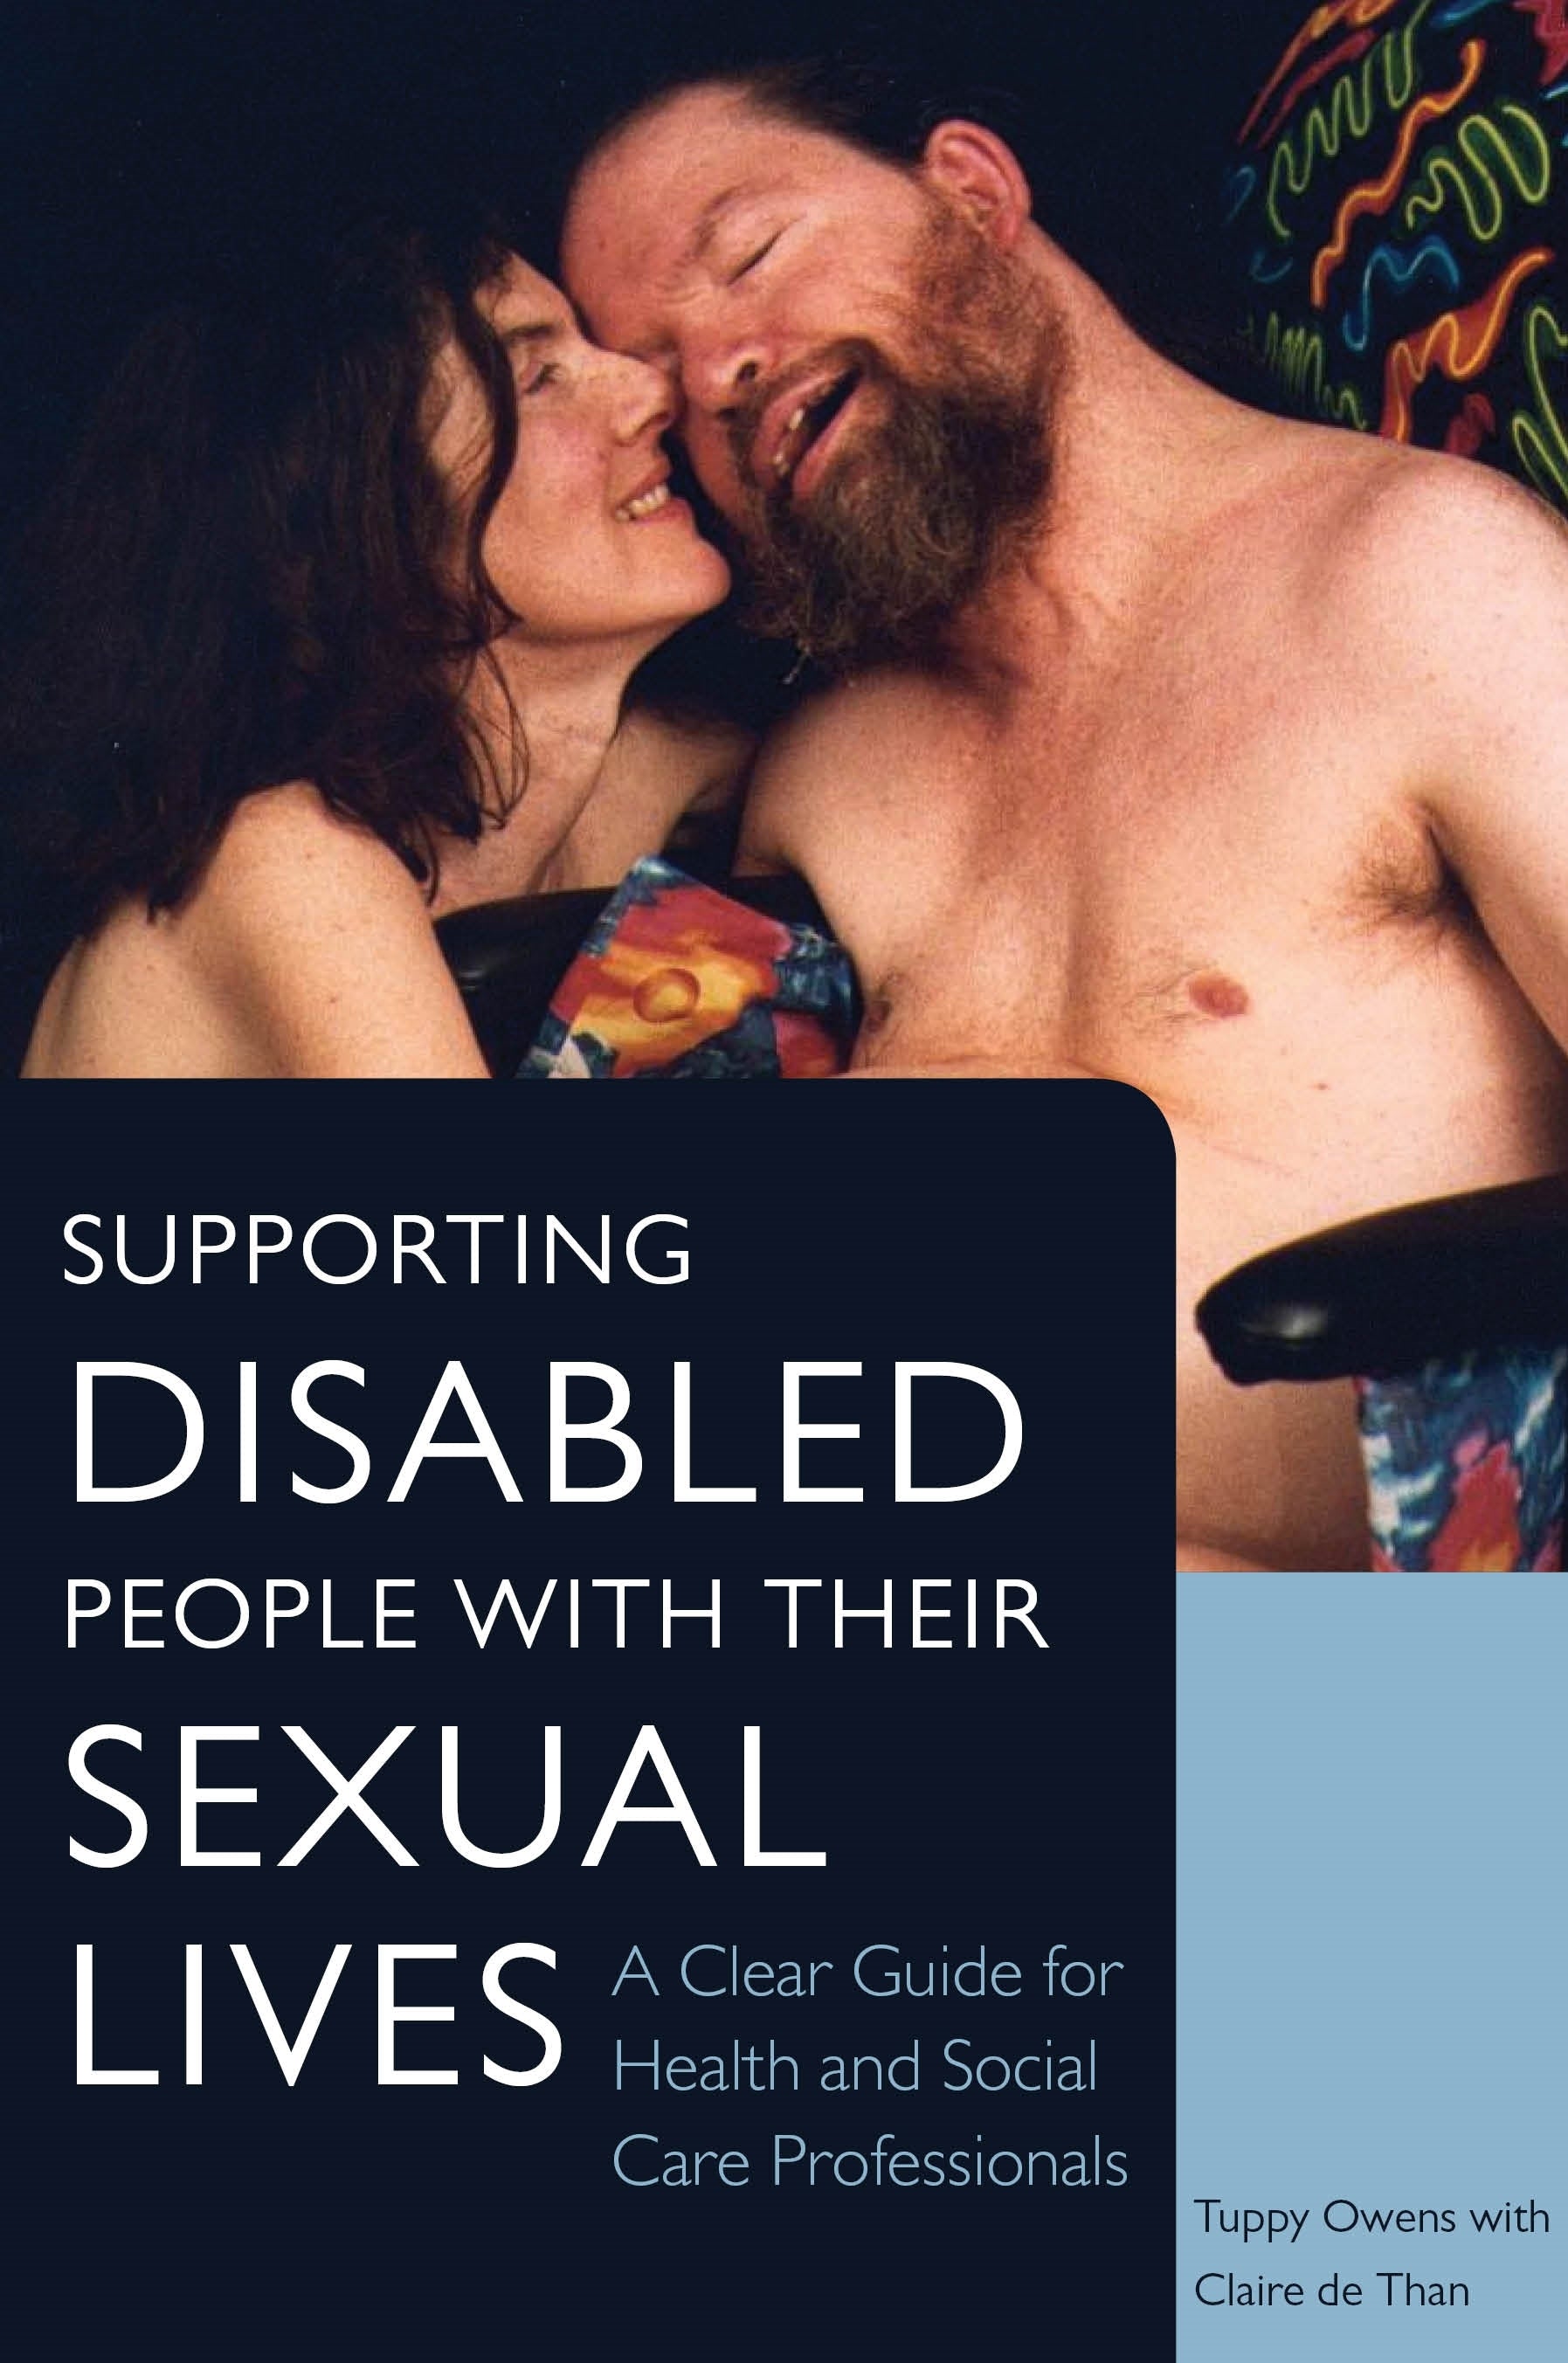 Supporting Disabled People with their Sexual Lives by Tuppy Owens